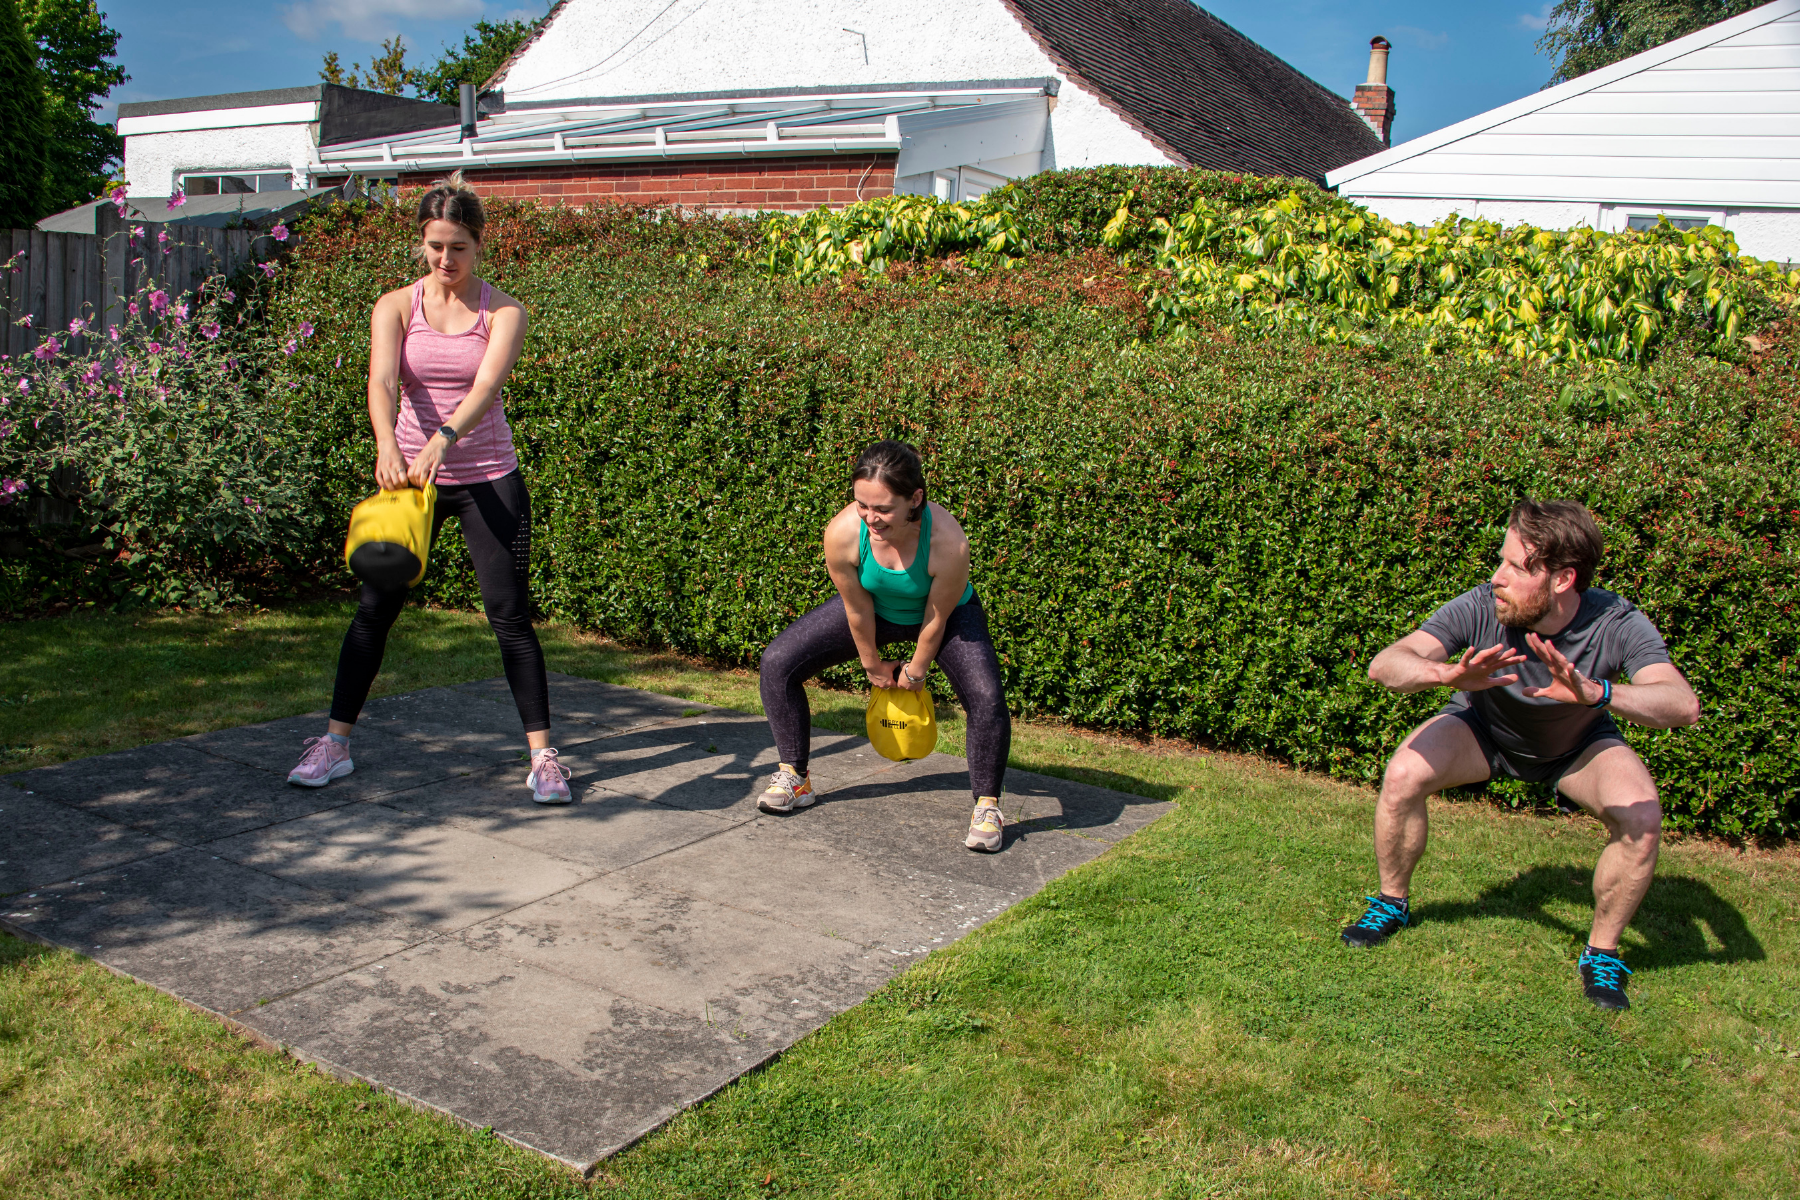 Rob leading a joint outdoor kettlebell session